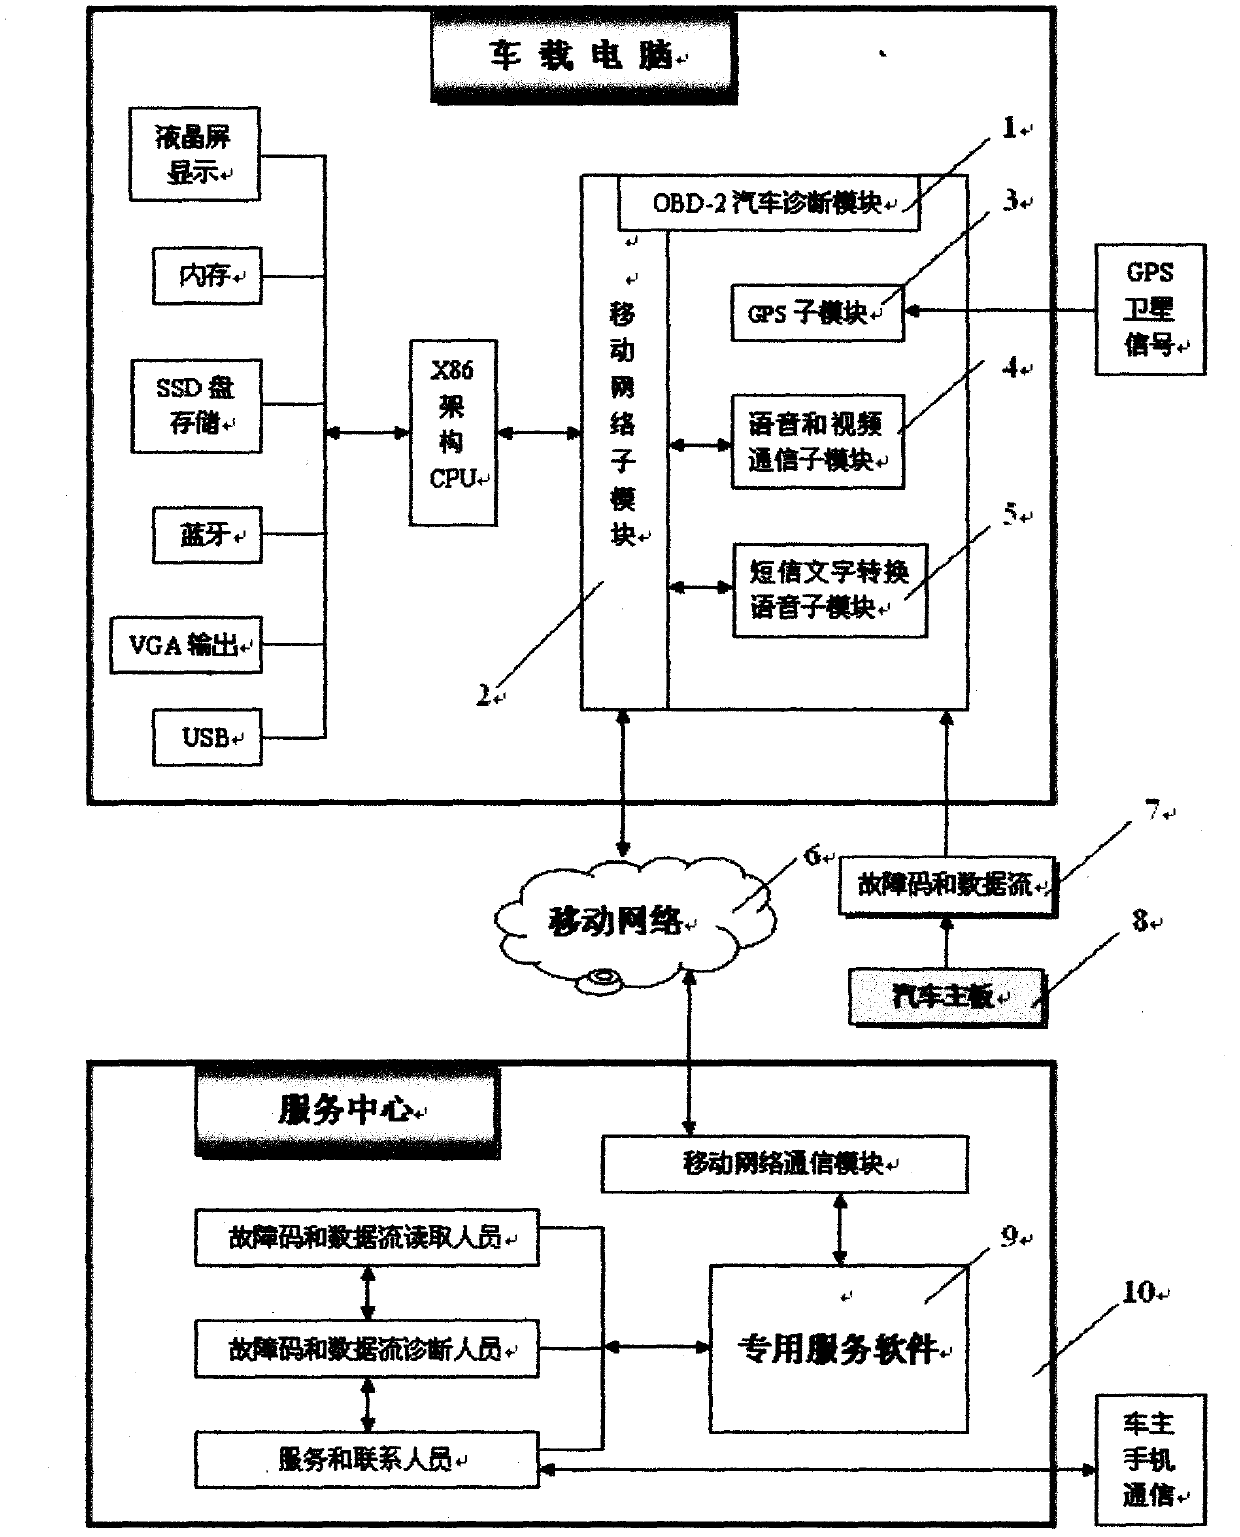 On-board computer and service center diagnosis system based on real-time information of communication network